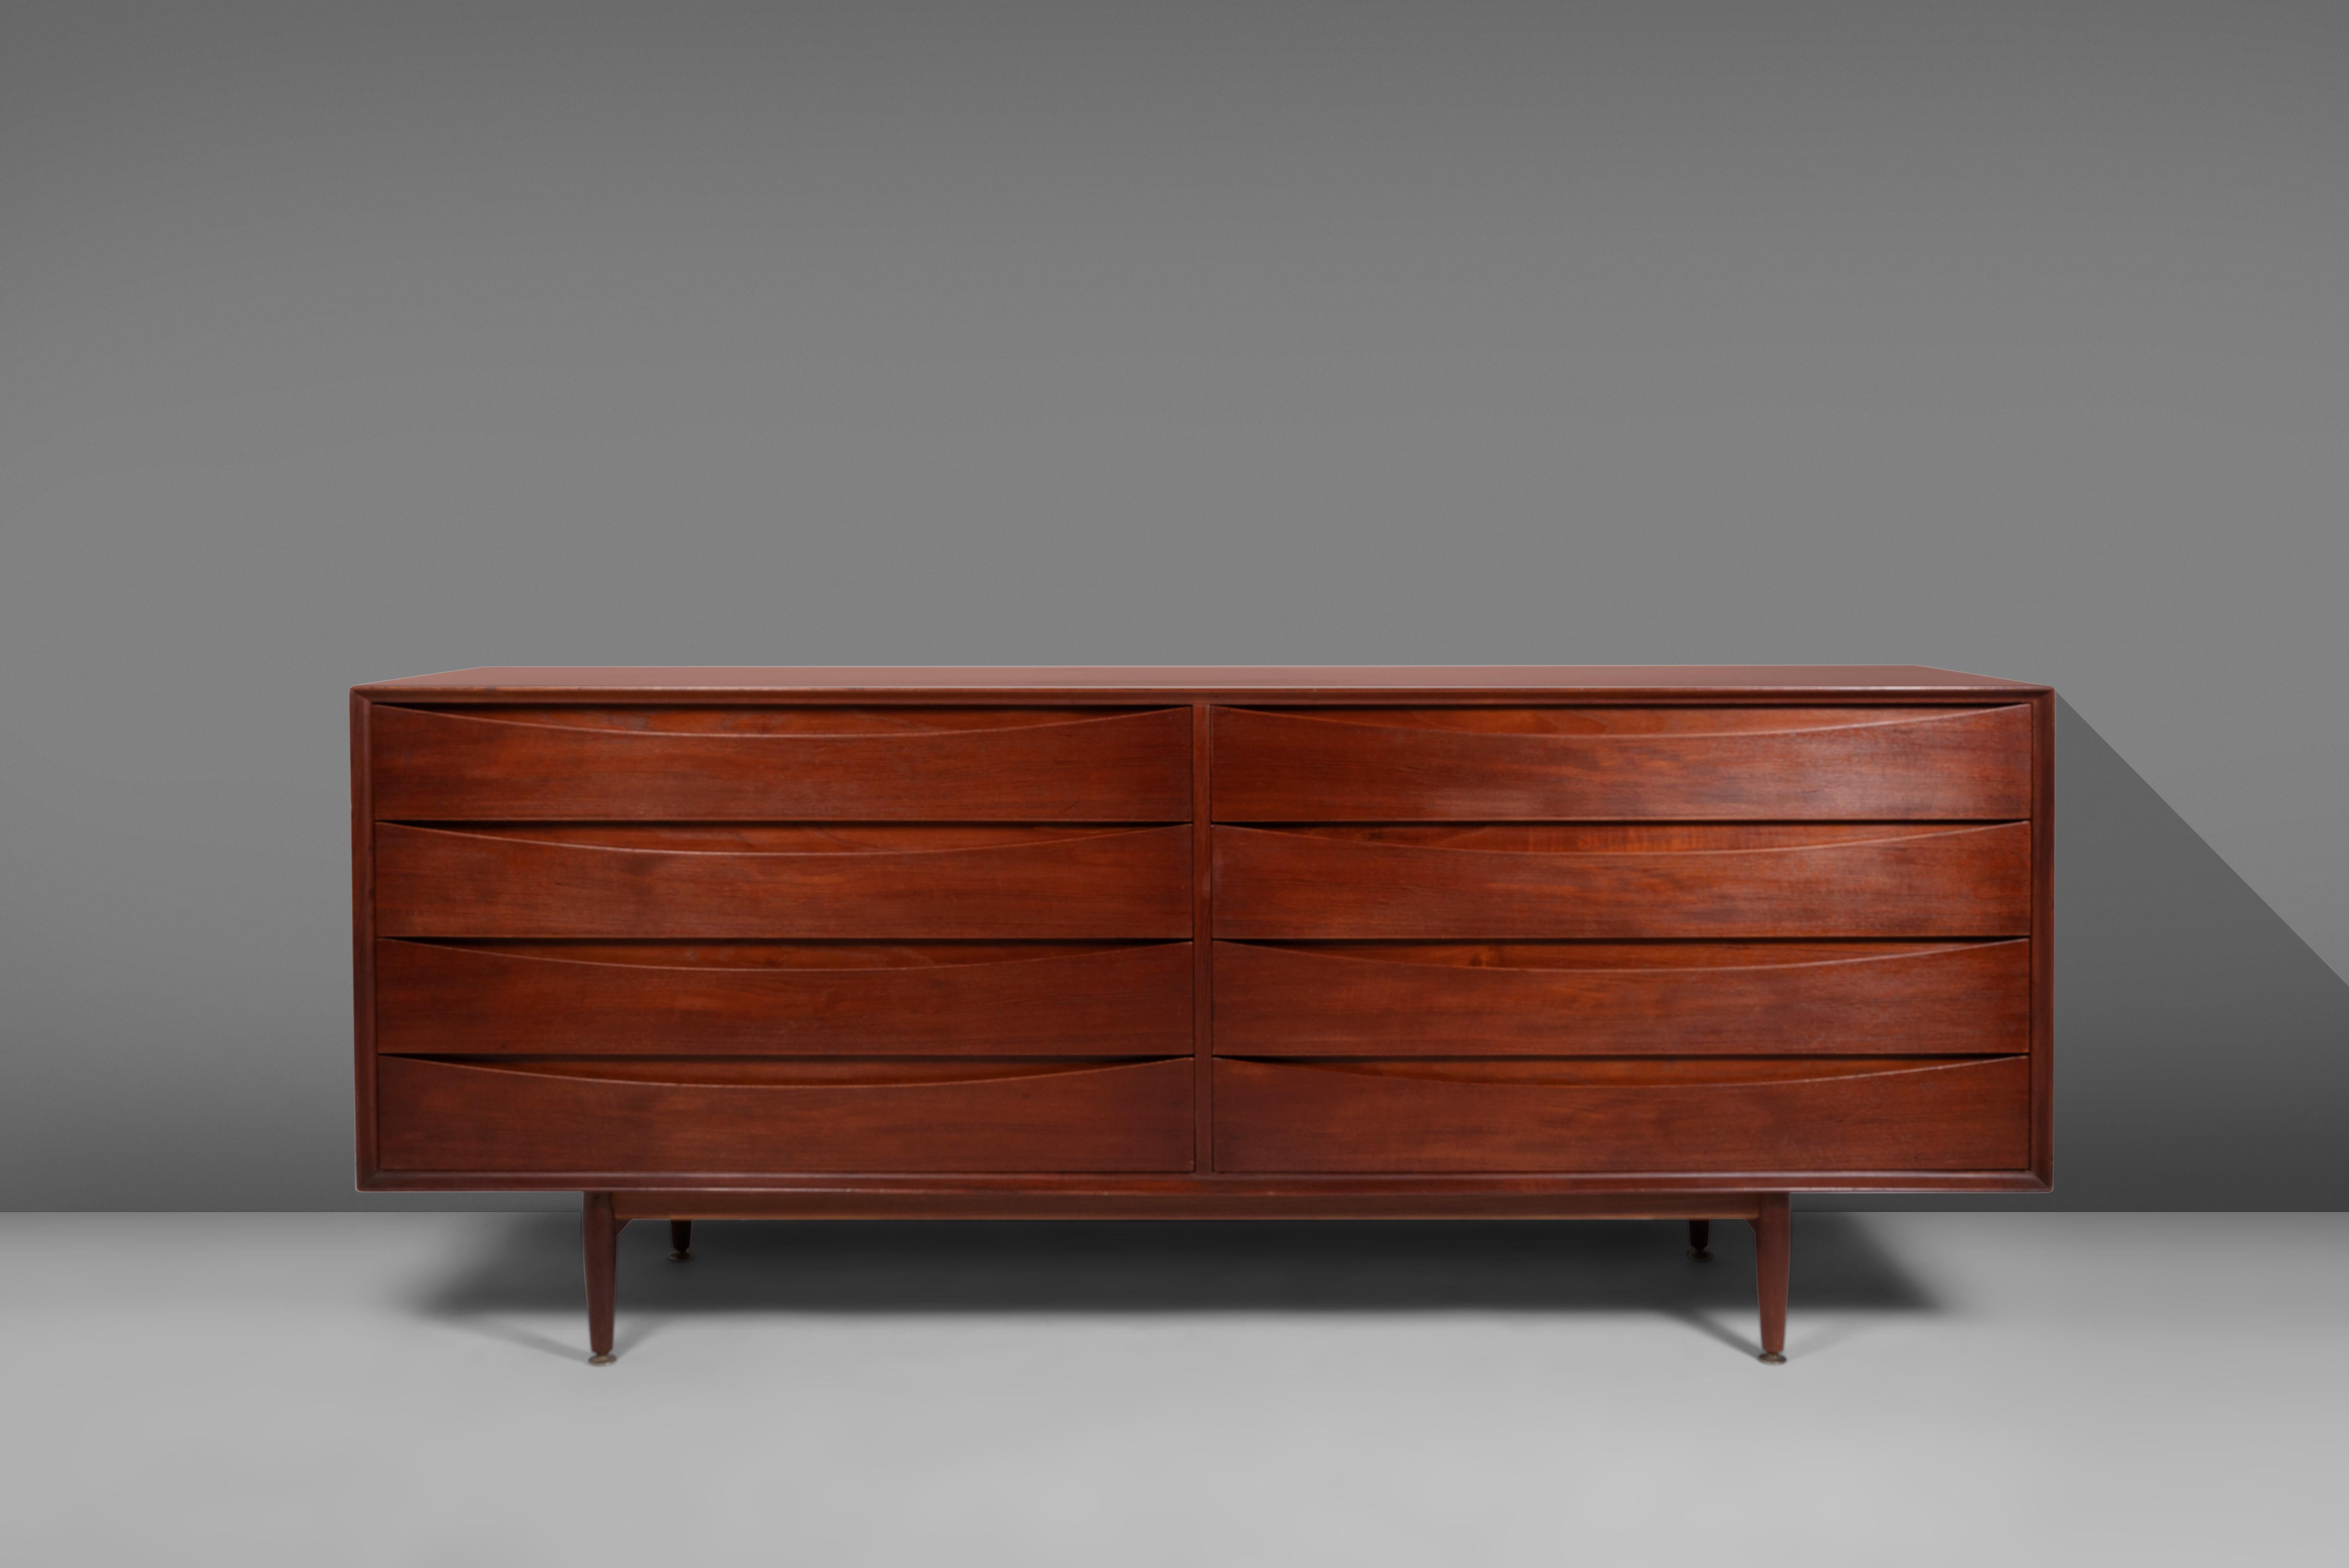 An iconic design by Arne Vodder, the mod. no. L-32-6 'Triennale' cabinet was produced by Sibast Mobler, c. 1950. Constructed in teak, the long eight drawer dresser which doubles as a credenza. The drawer faces are both architectural and functional